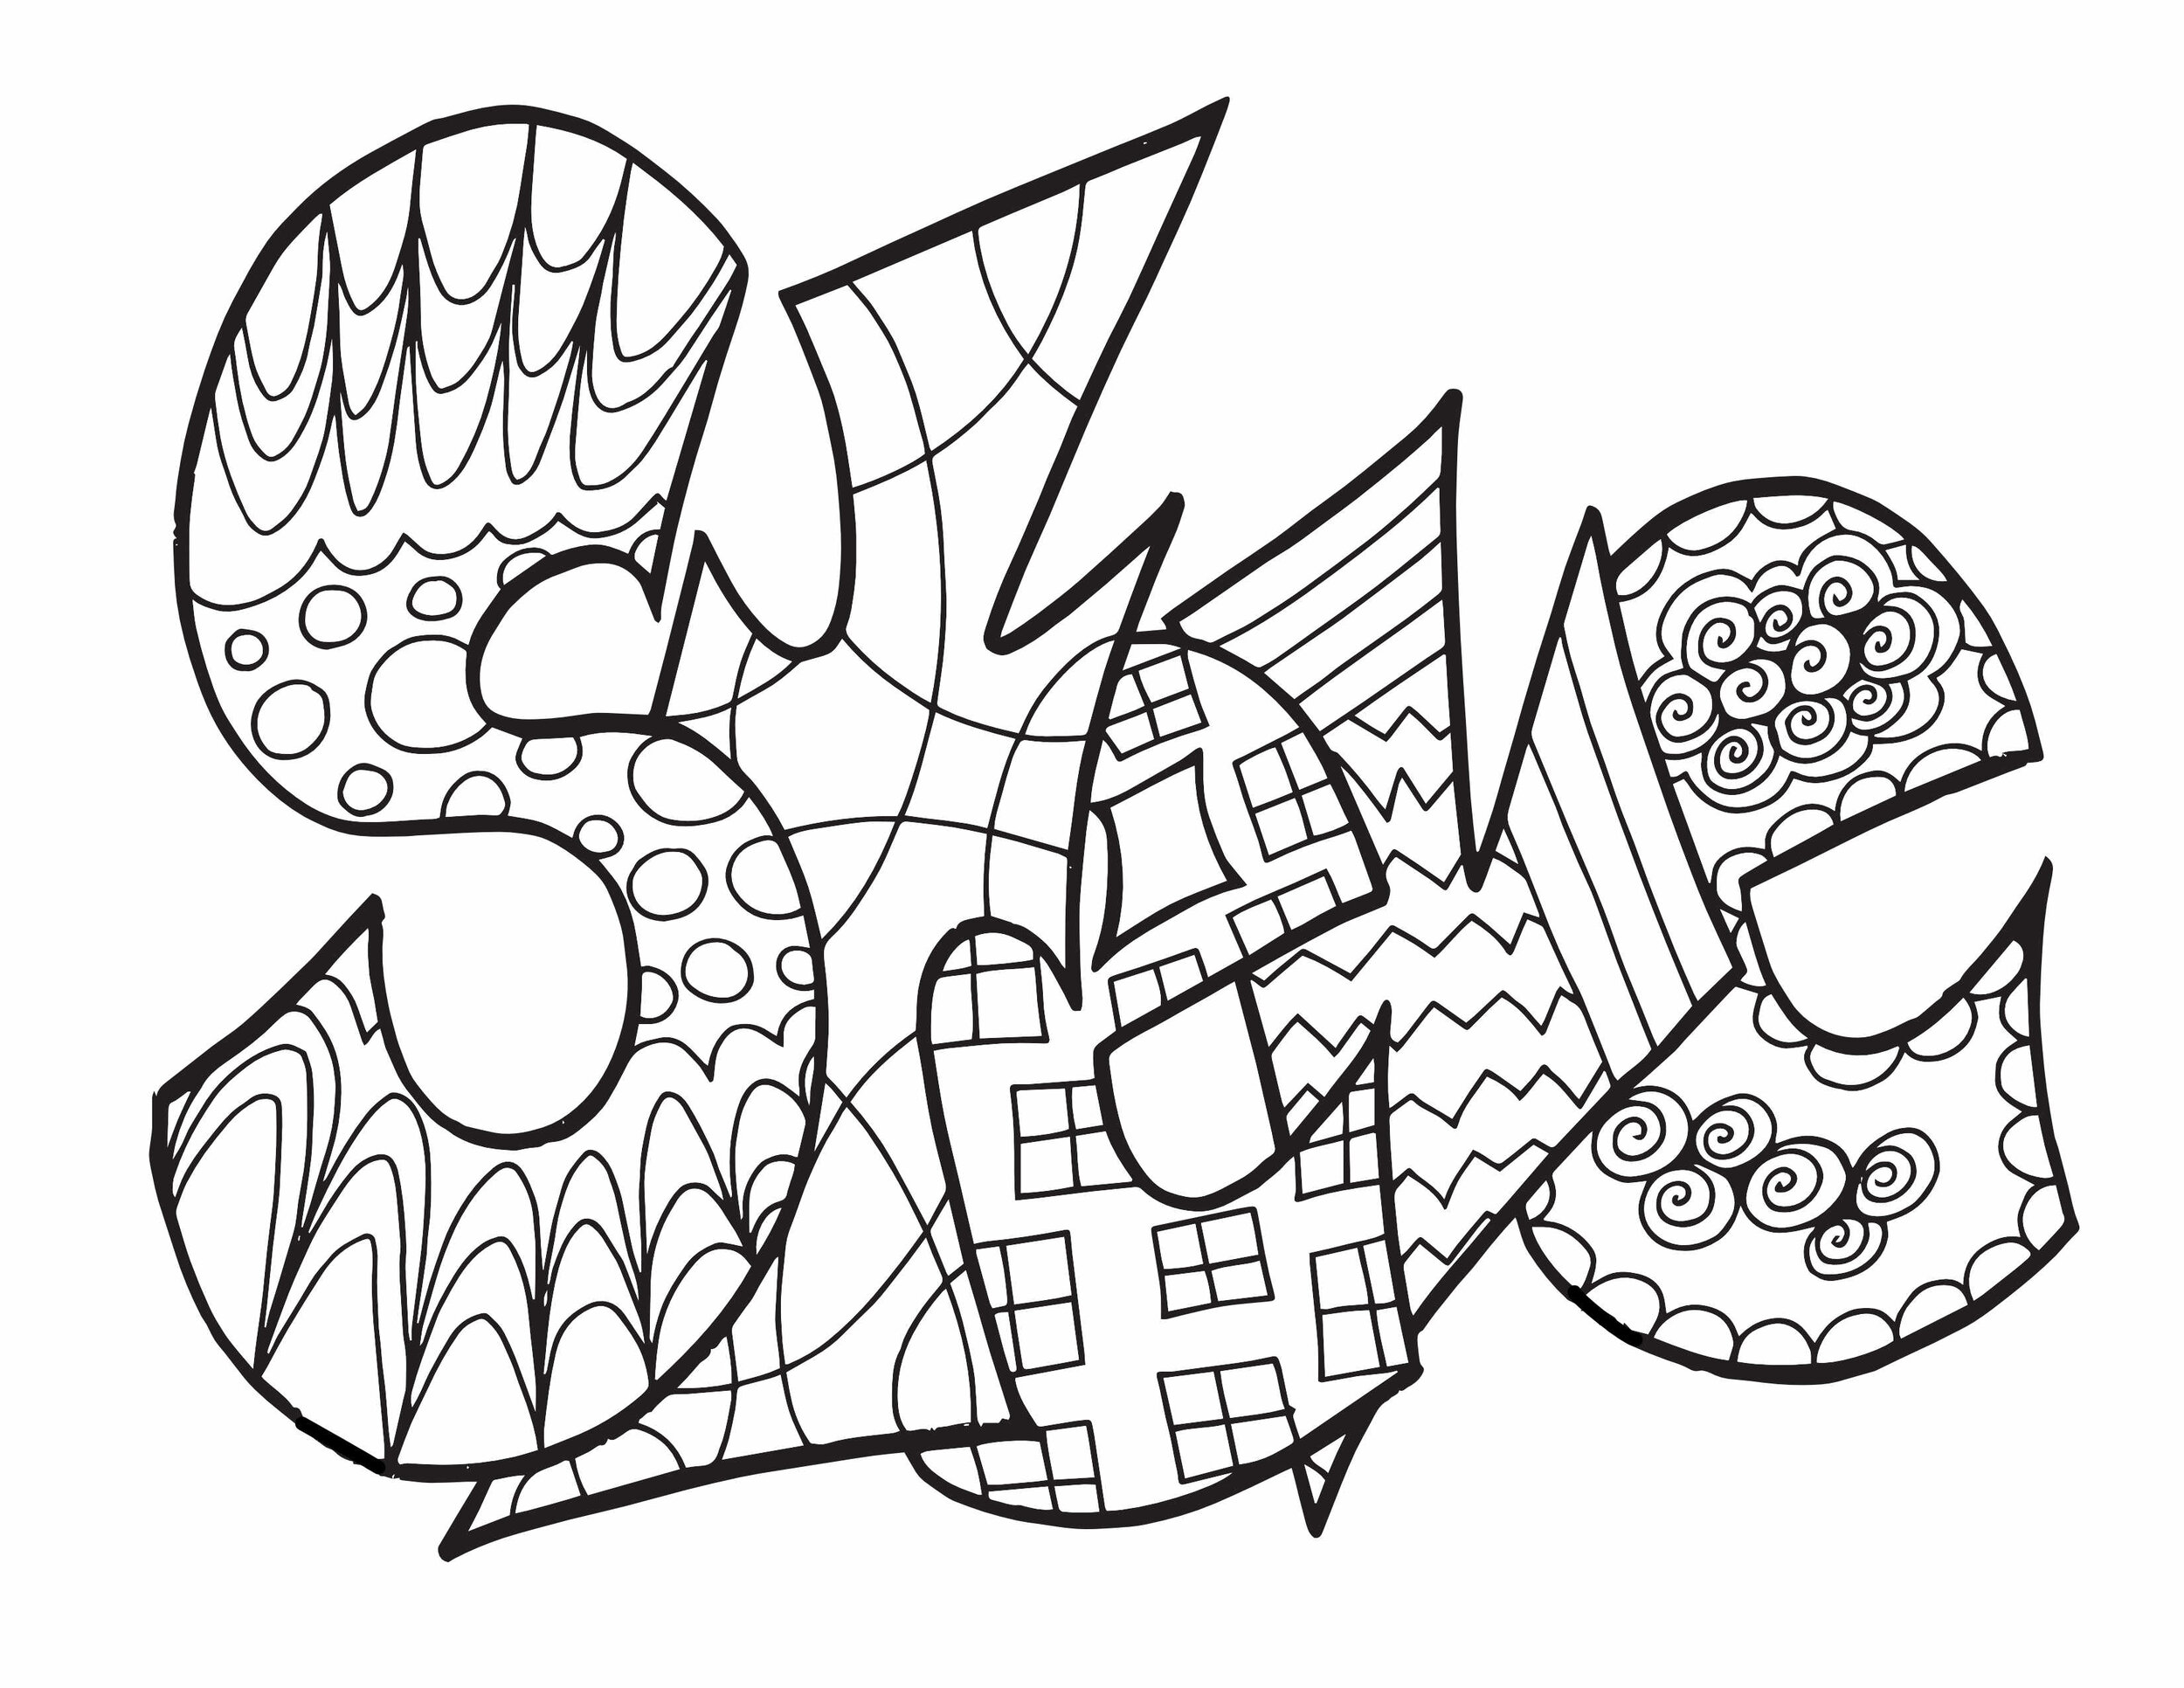 Free Printable Coloring Page - STEVE - Search your name!  CLICK HERE TO DOWNLOAD YOUR FREE COLORING PAGE